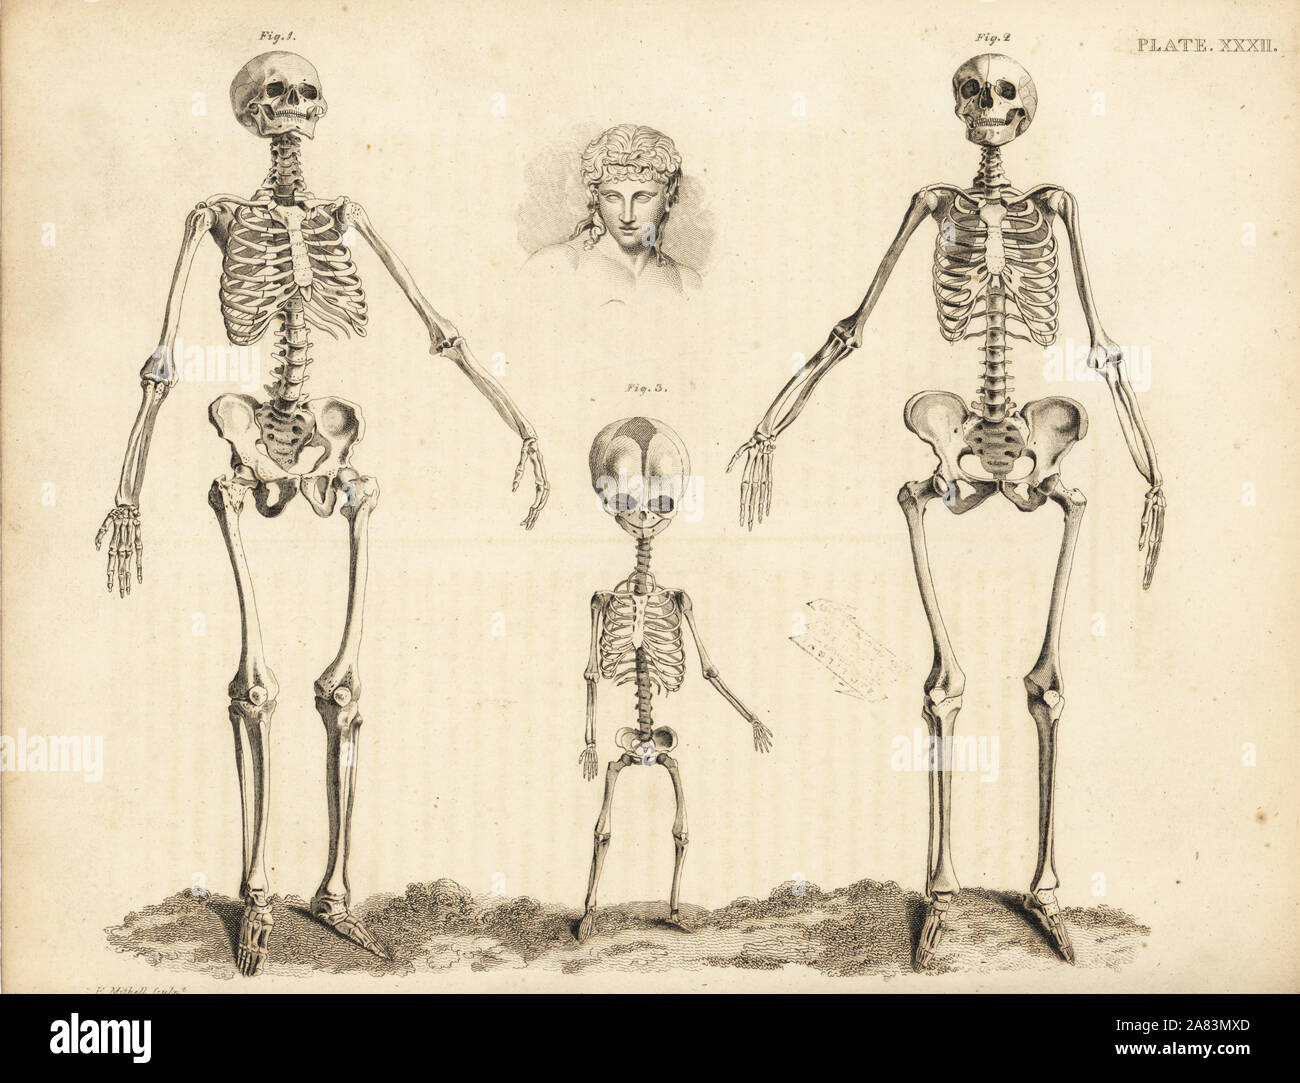 Comparison of the skeletons of the human male, female and foetus at birth. Copperplate engraving by Edward Mitchell after an anatomical illustration by Jean-Joseph Sue from John Barclay's A Series of Engravings of the Human Skeleton, MacLachlan and Stewart, Edinburgh, 1824. Stock Photo